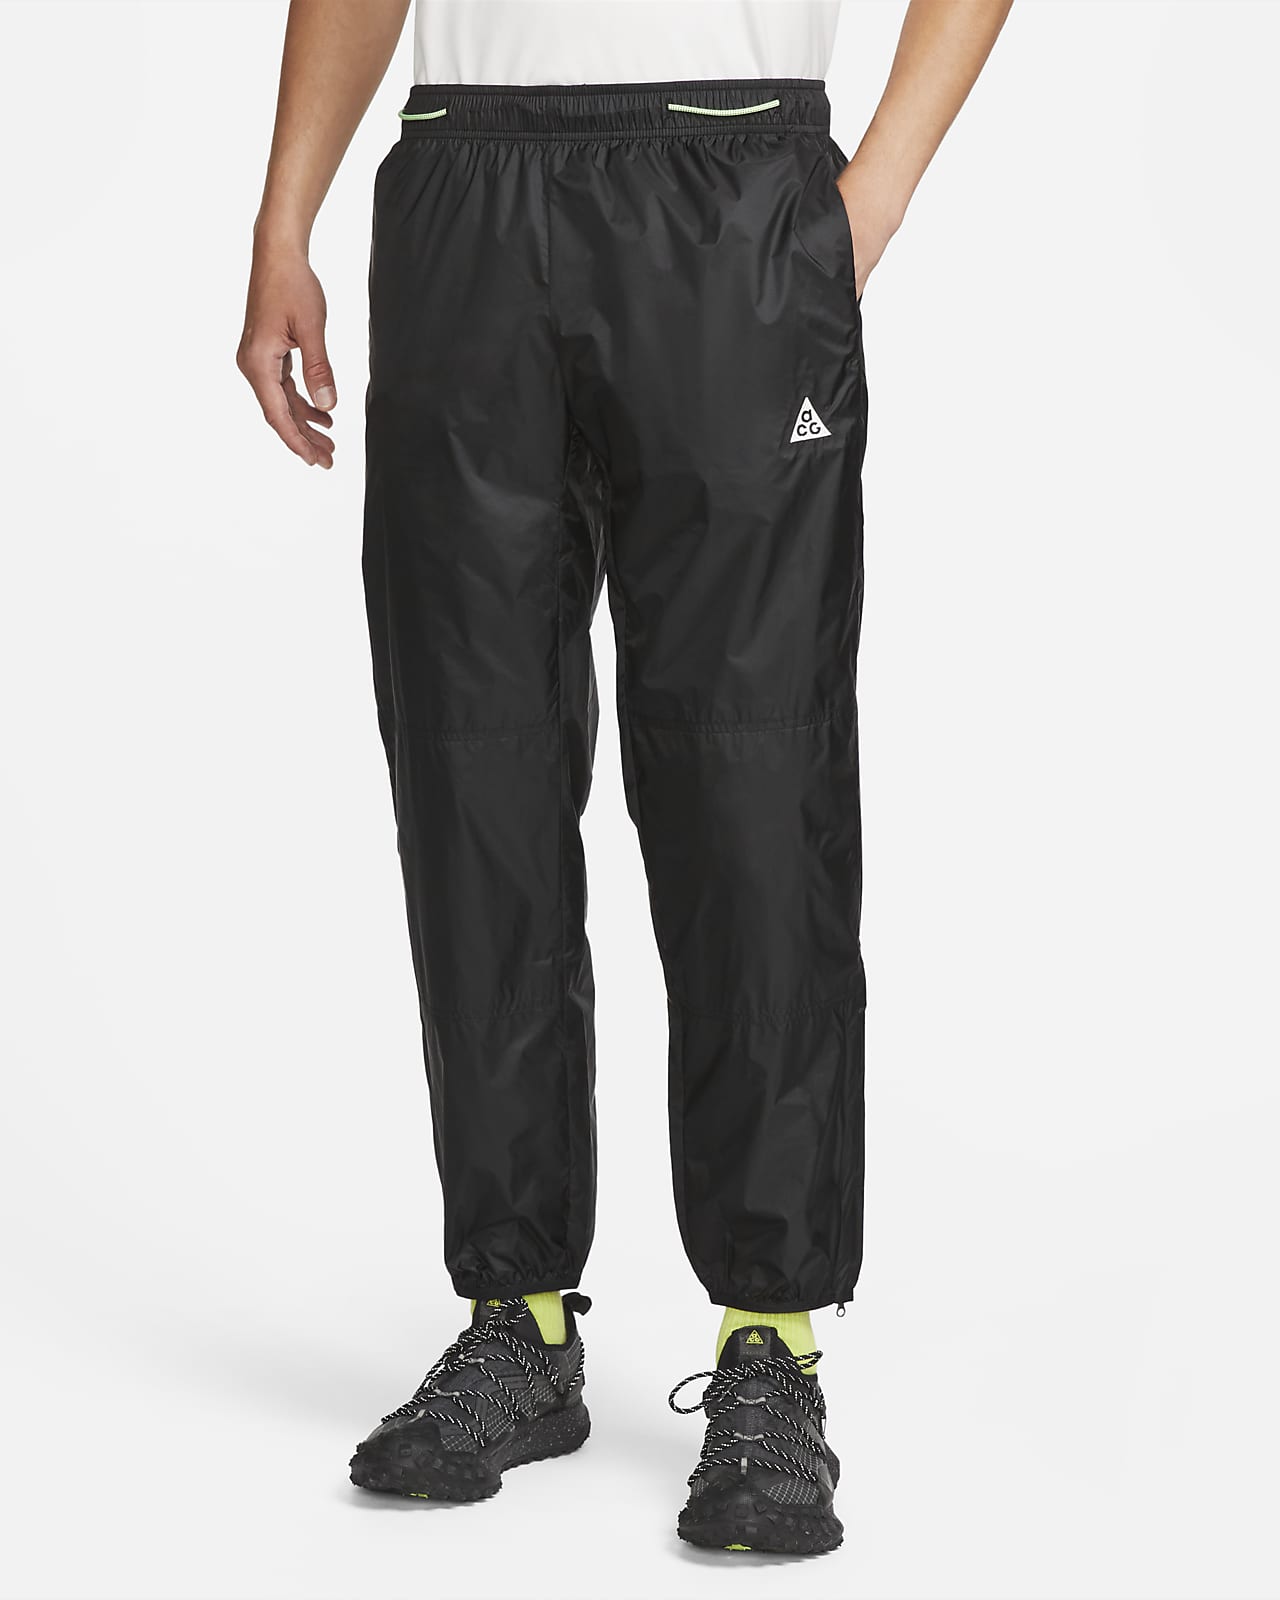 Nike ACG "Cinder Cone" Men's Windshell Trousers